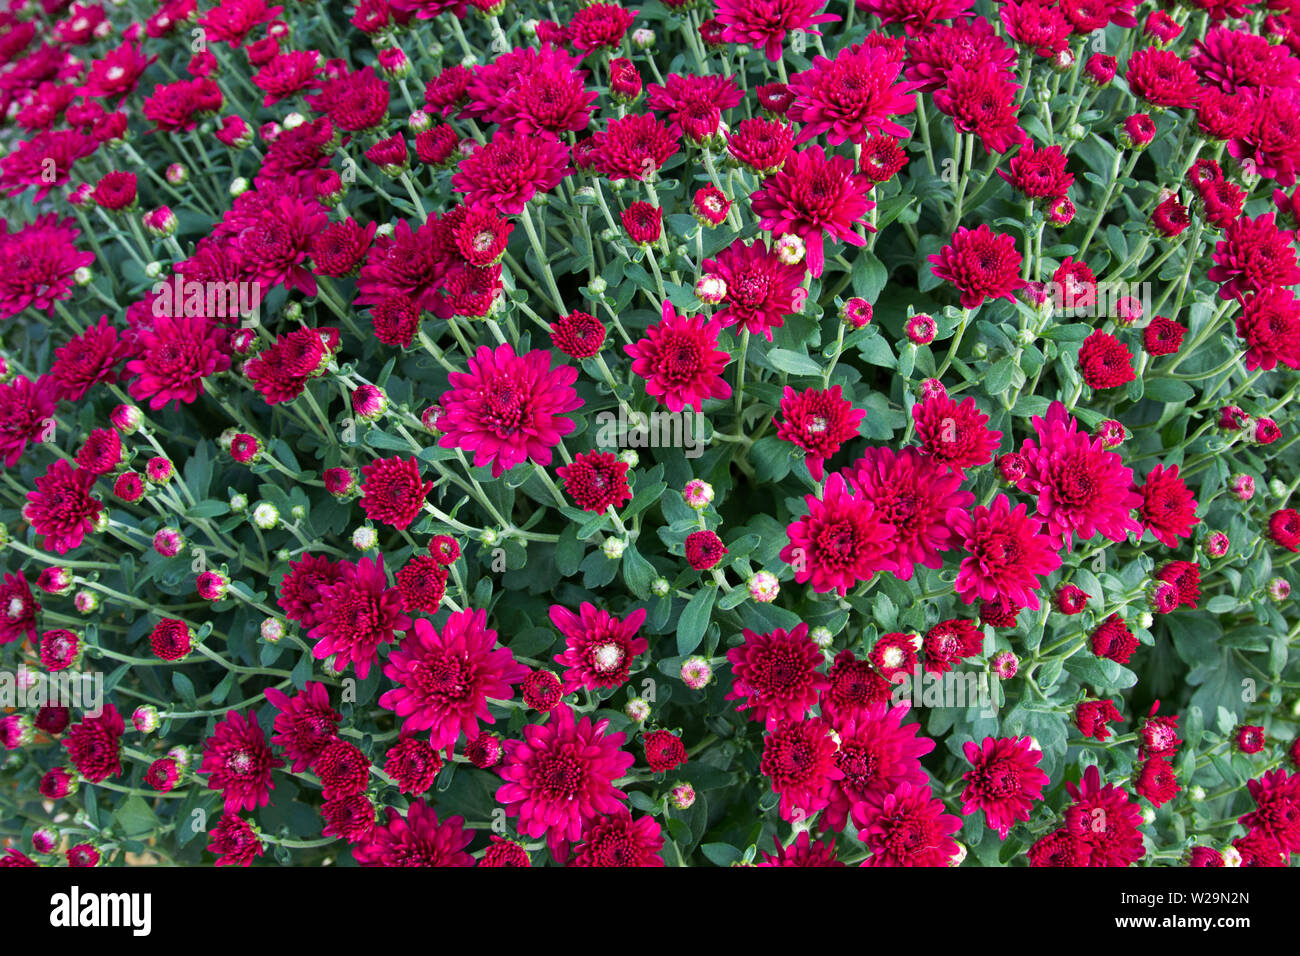 Vibrant burgundy colored mums shot from above. Stock Photo